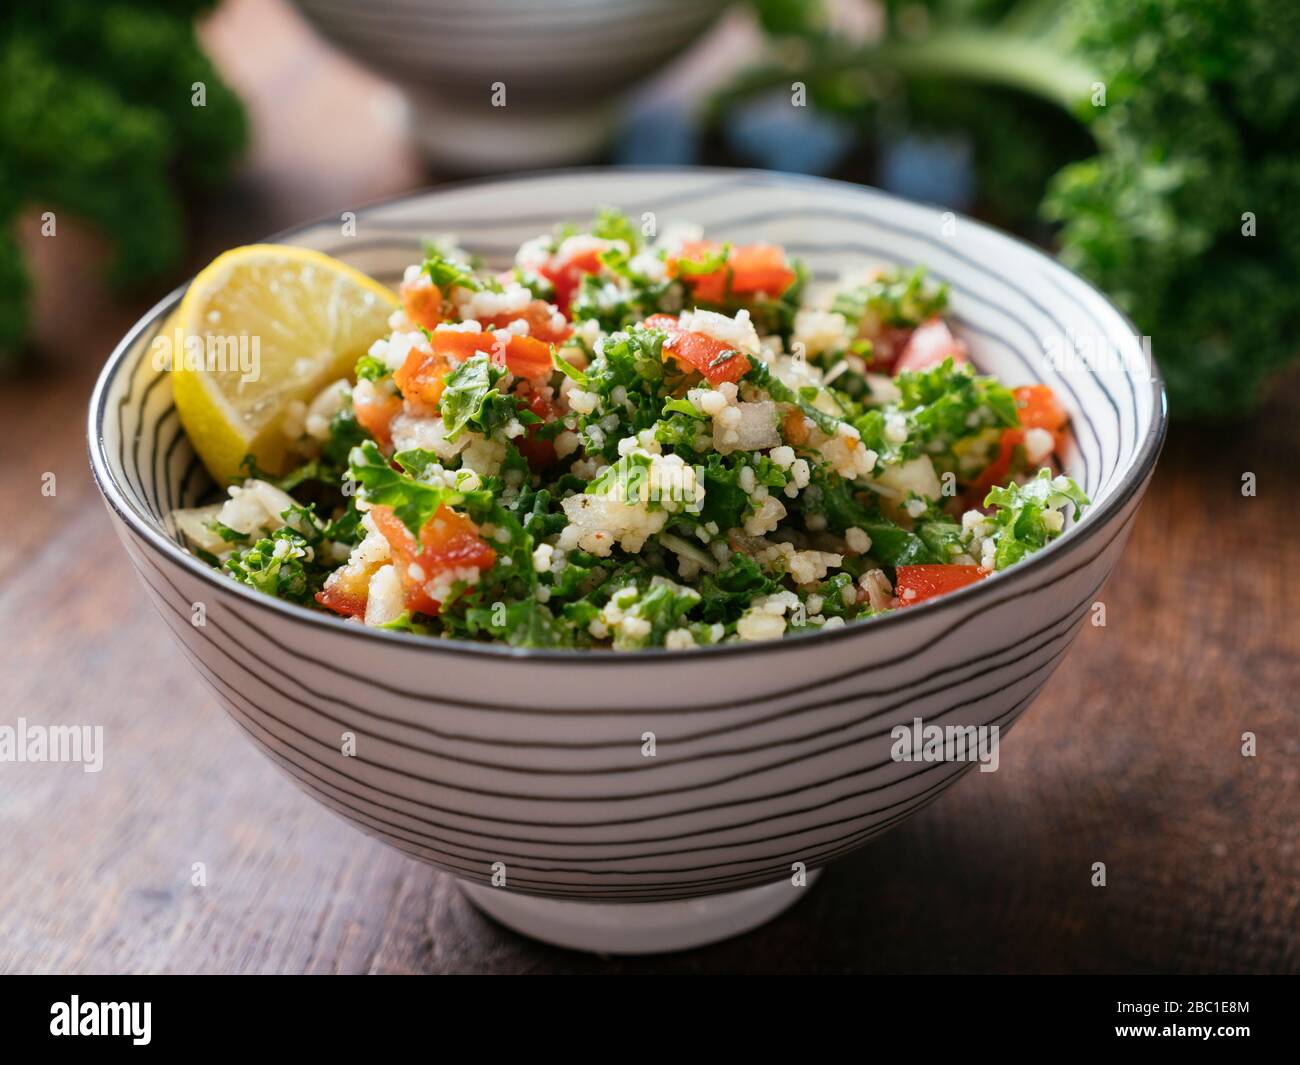 Variation of the traditional Tabbouleh, salad, using kale instead of parsley. Stock Photo